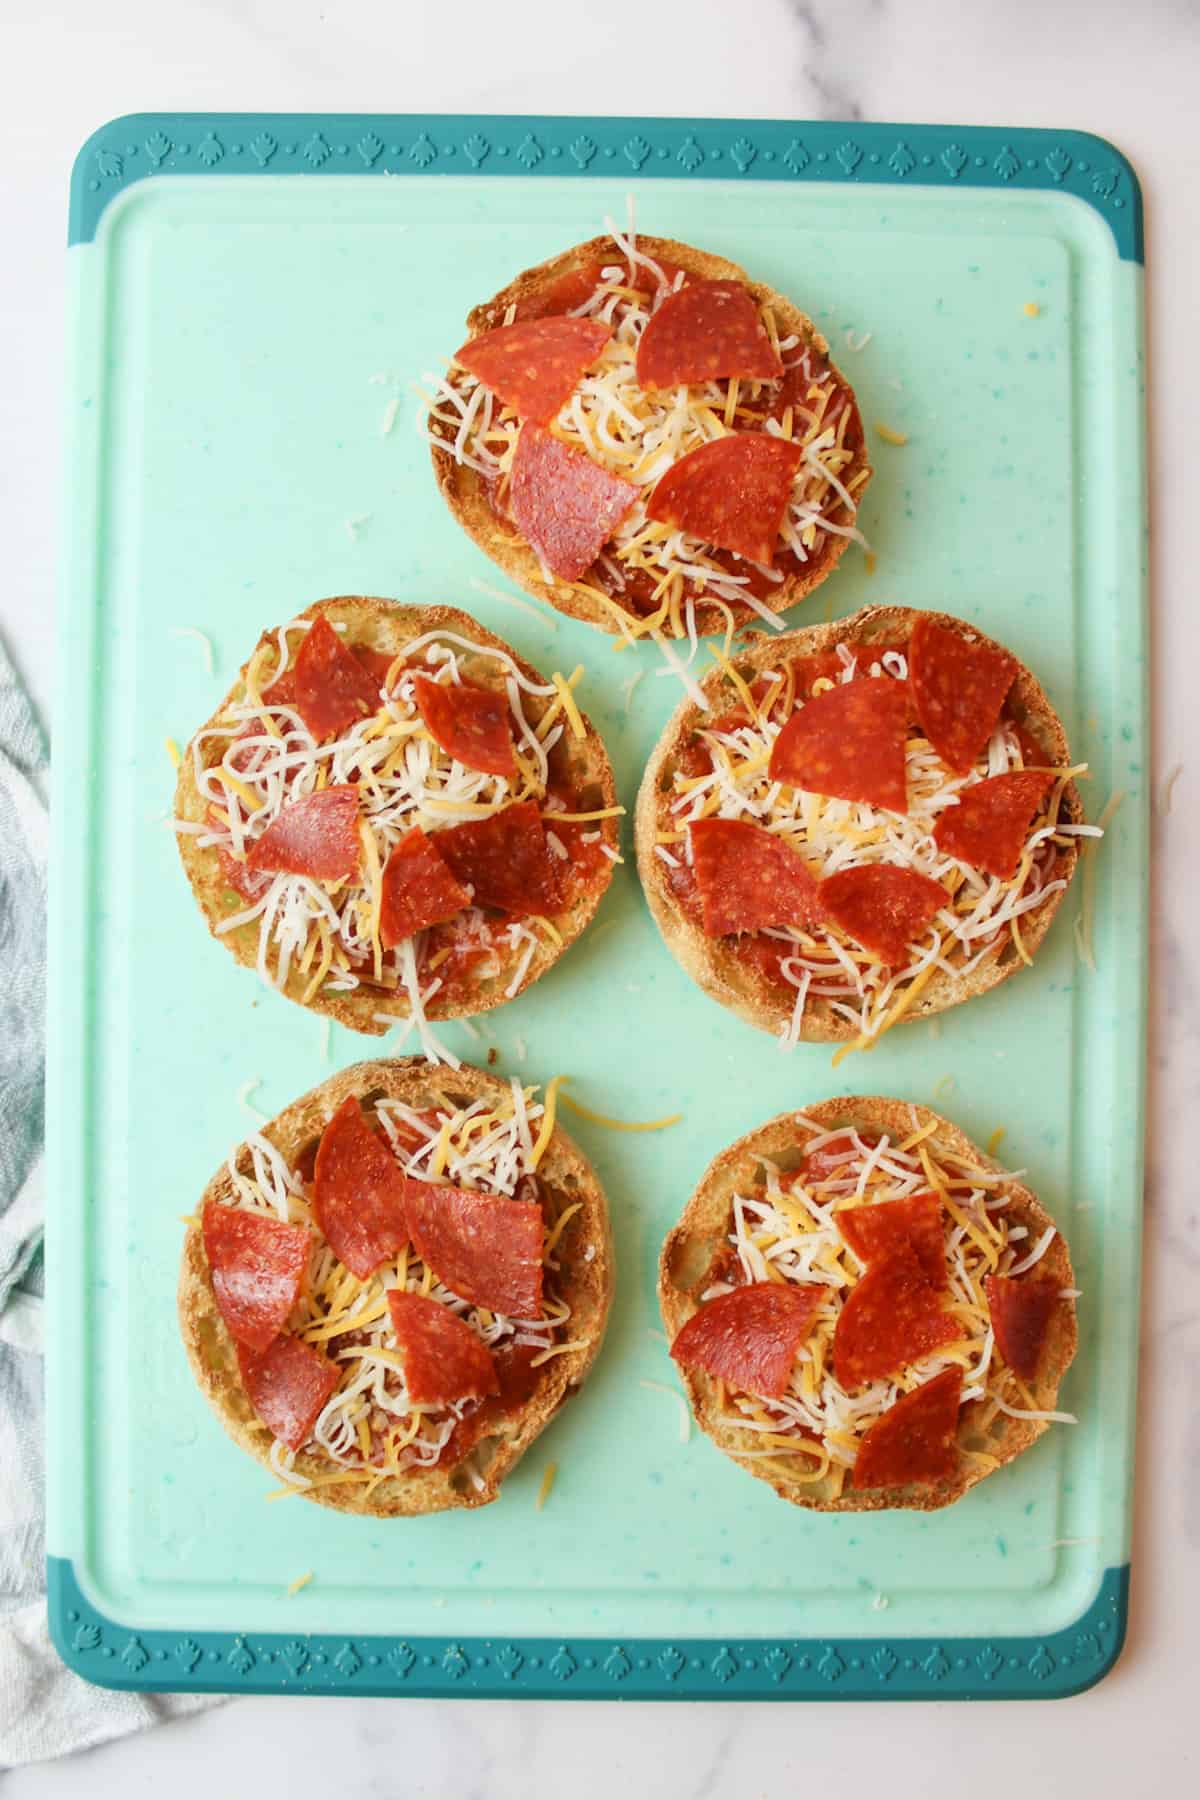 assembled and unbaked english muffin pizzas on a cutting board.